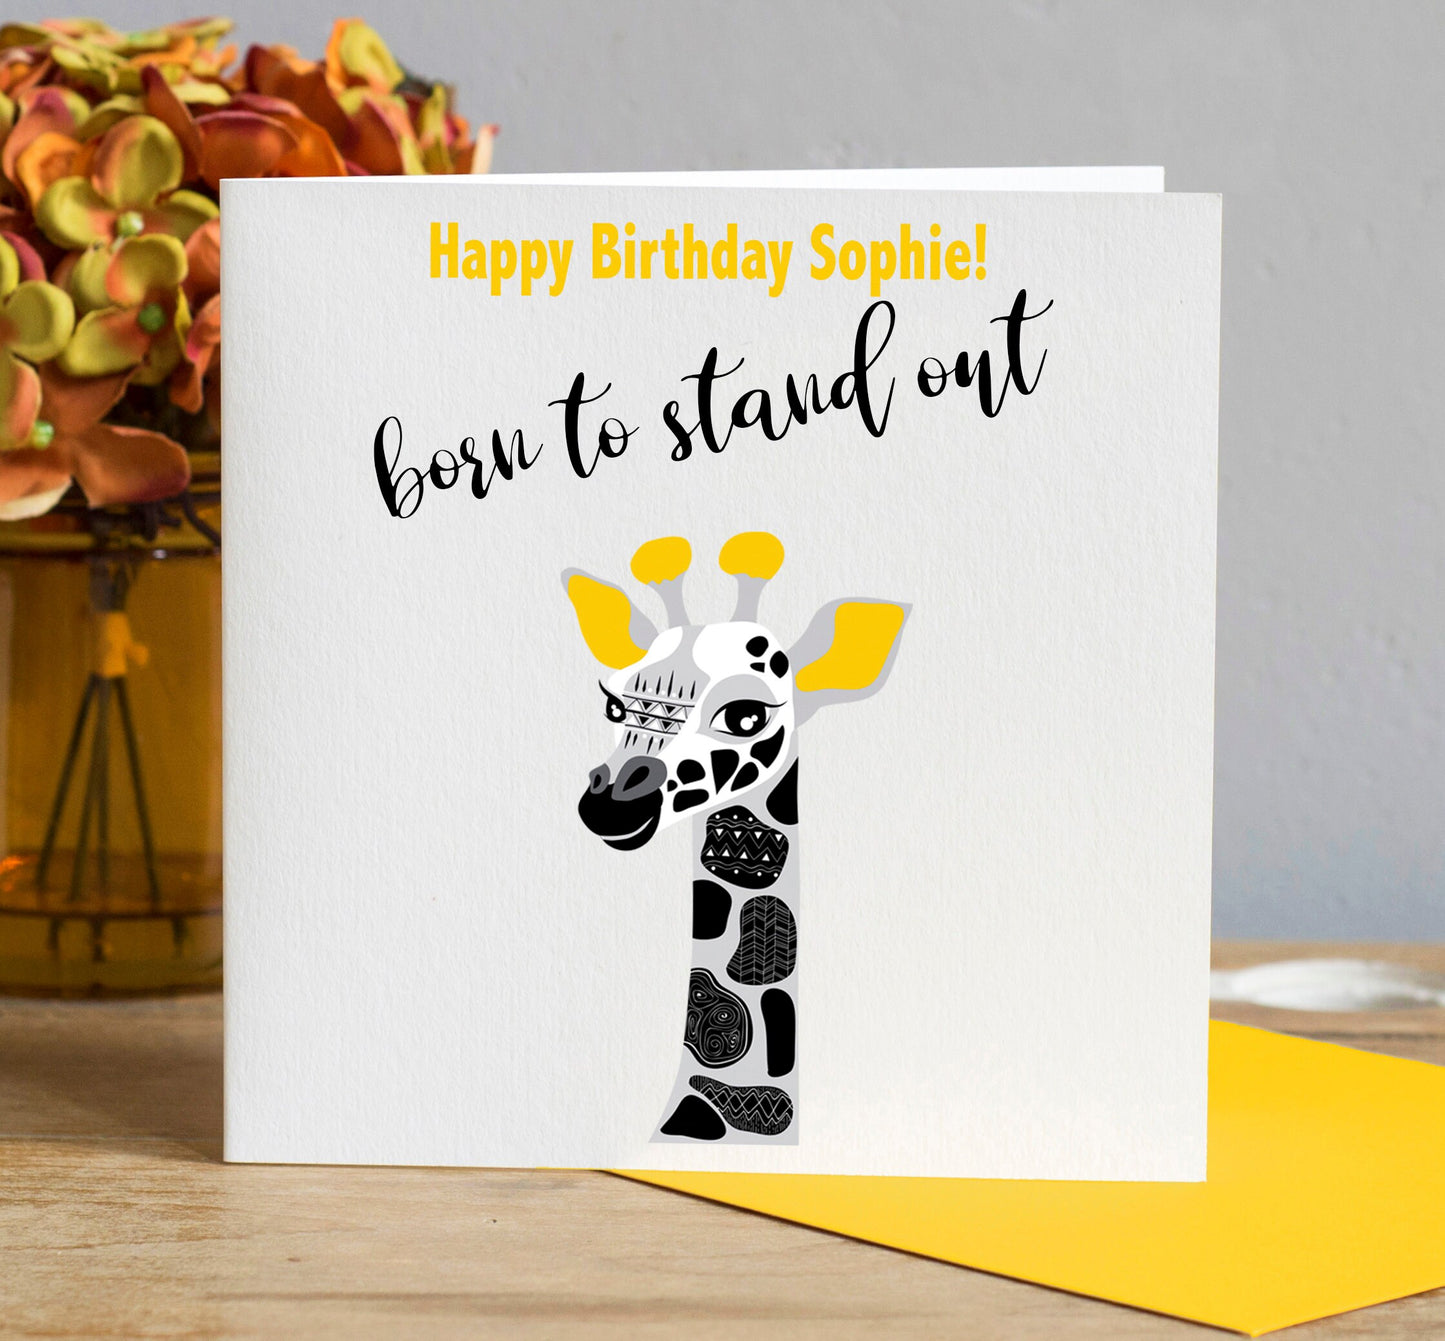 Born To Stand Out Birthday Card